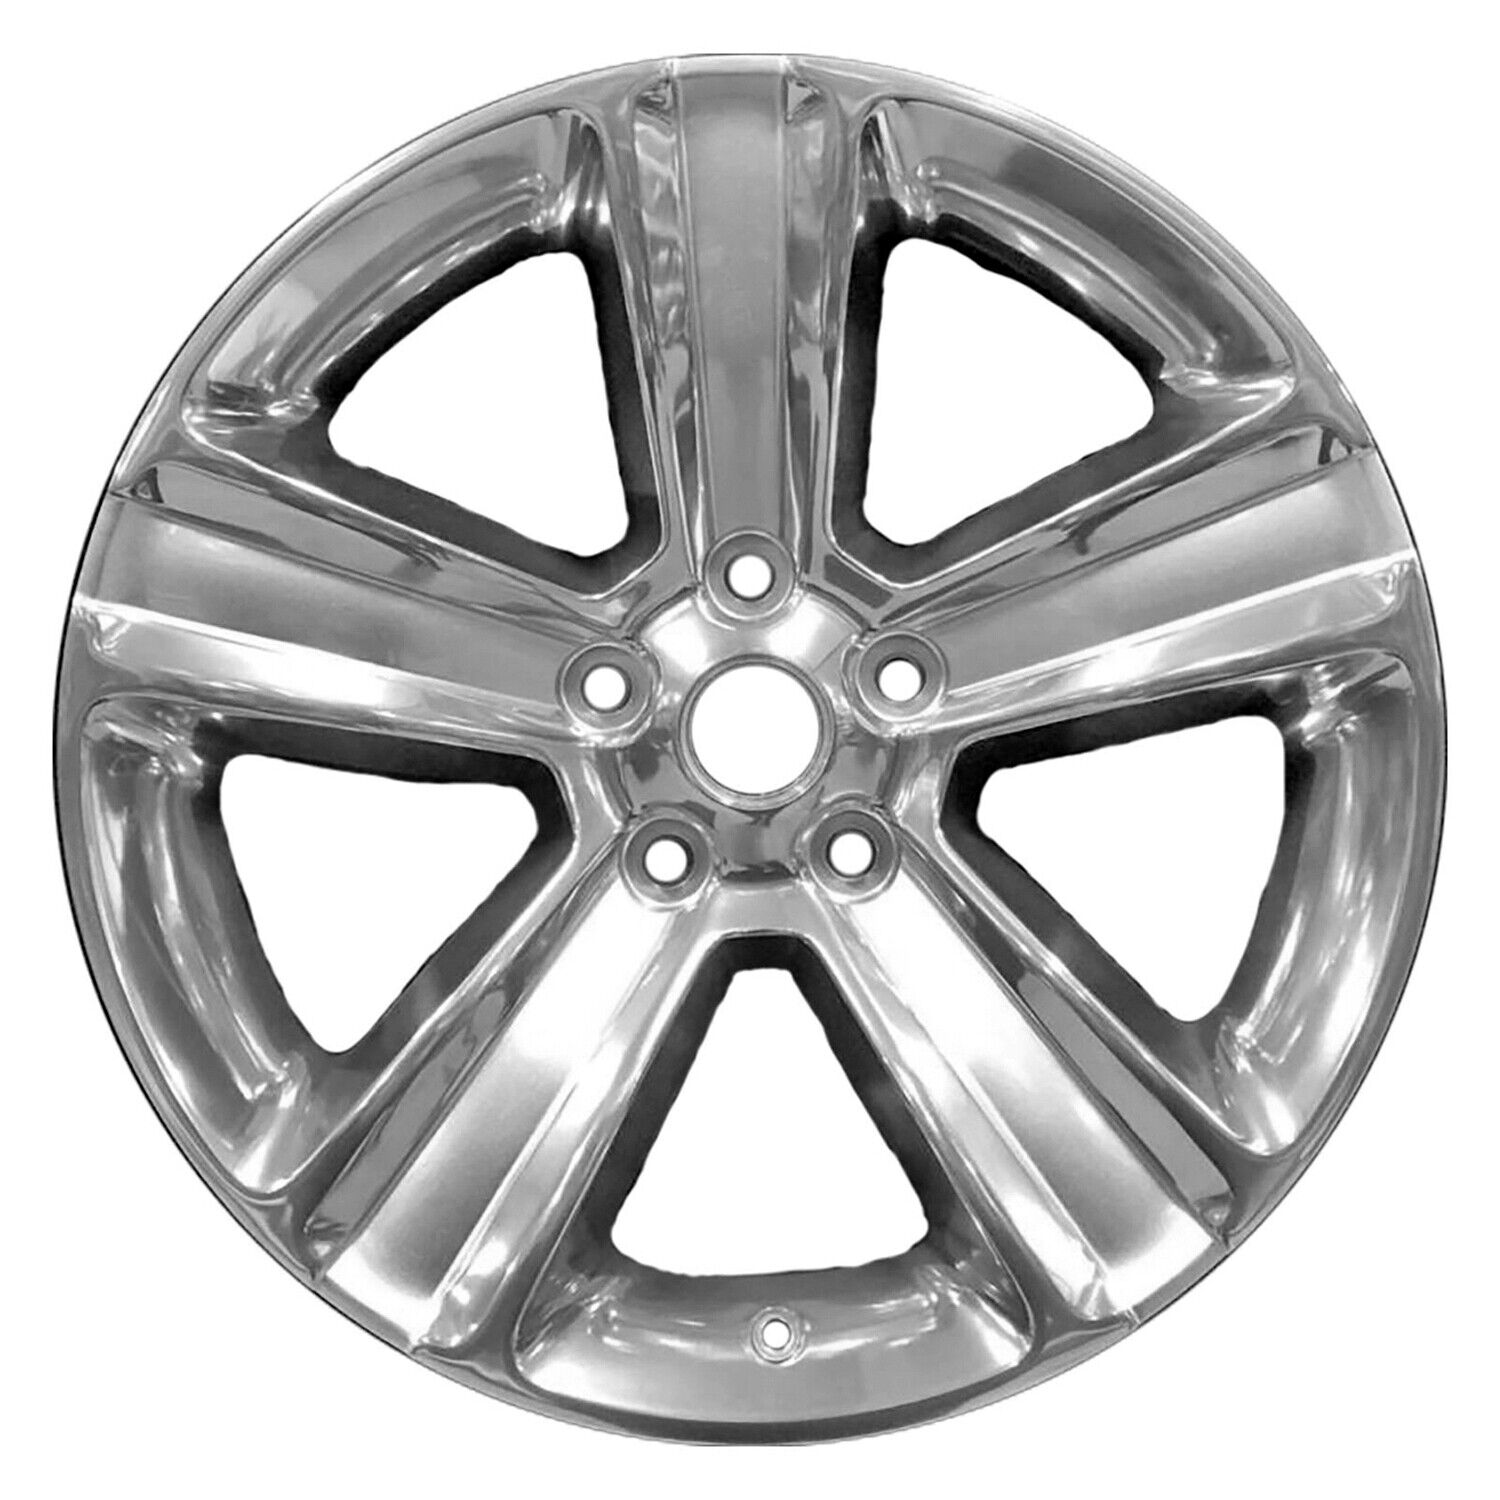 02453 Used OE Factory 20in Wheel Polished w/Silver Fits 2013-2019 Dodge Ram 1500